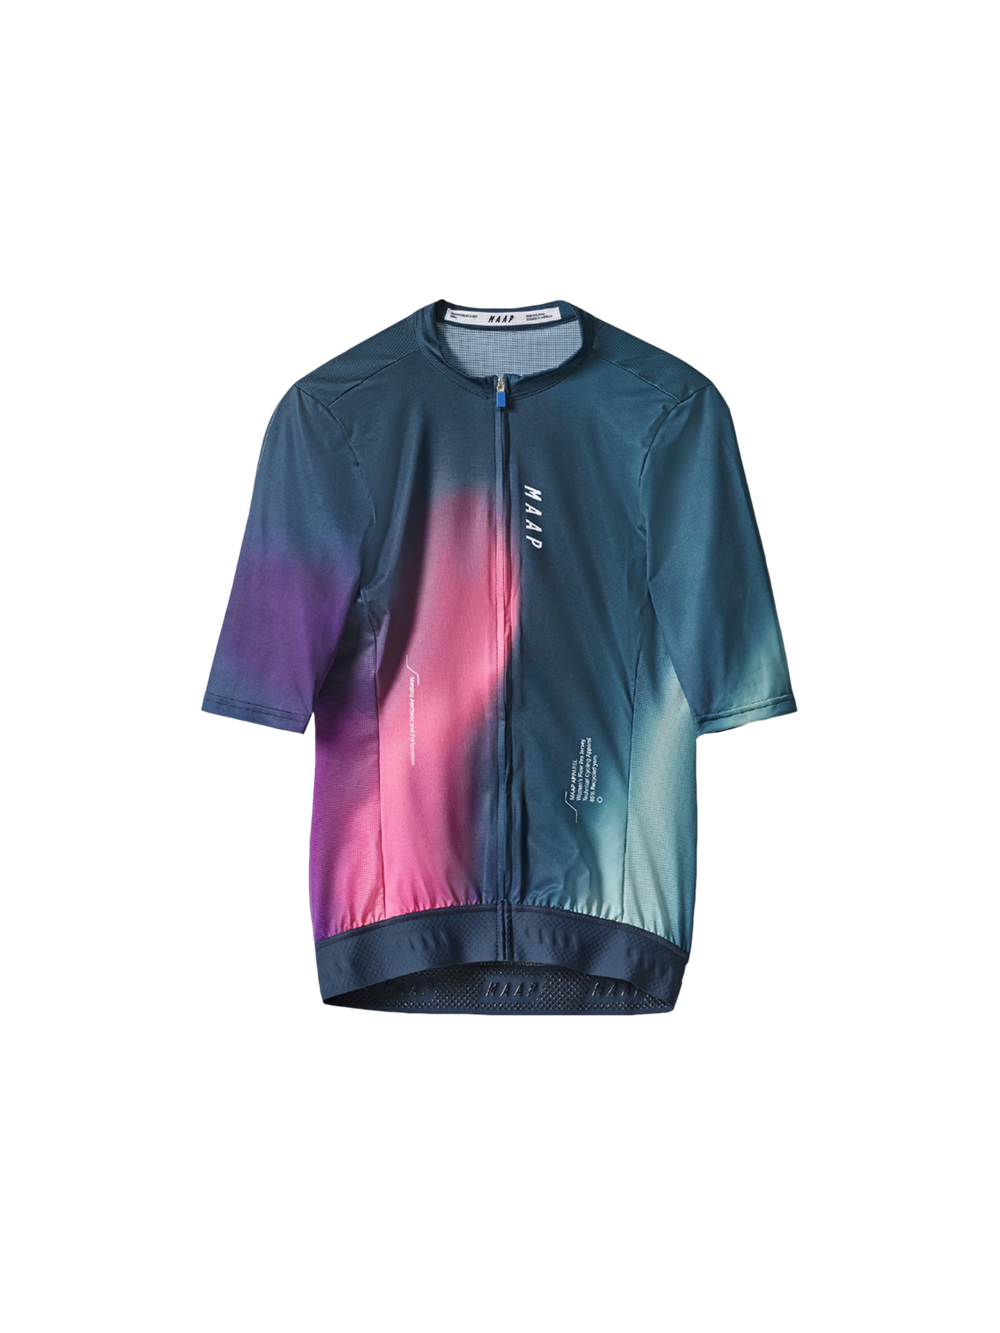 Product Image for Women's Flow Pro Jersey